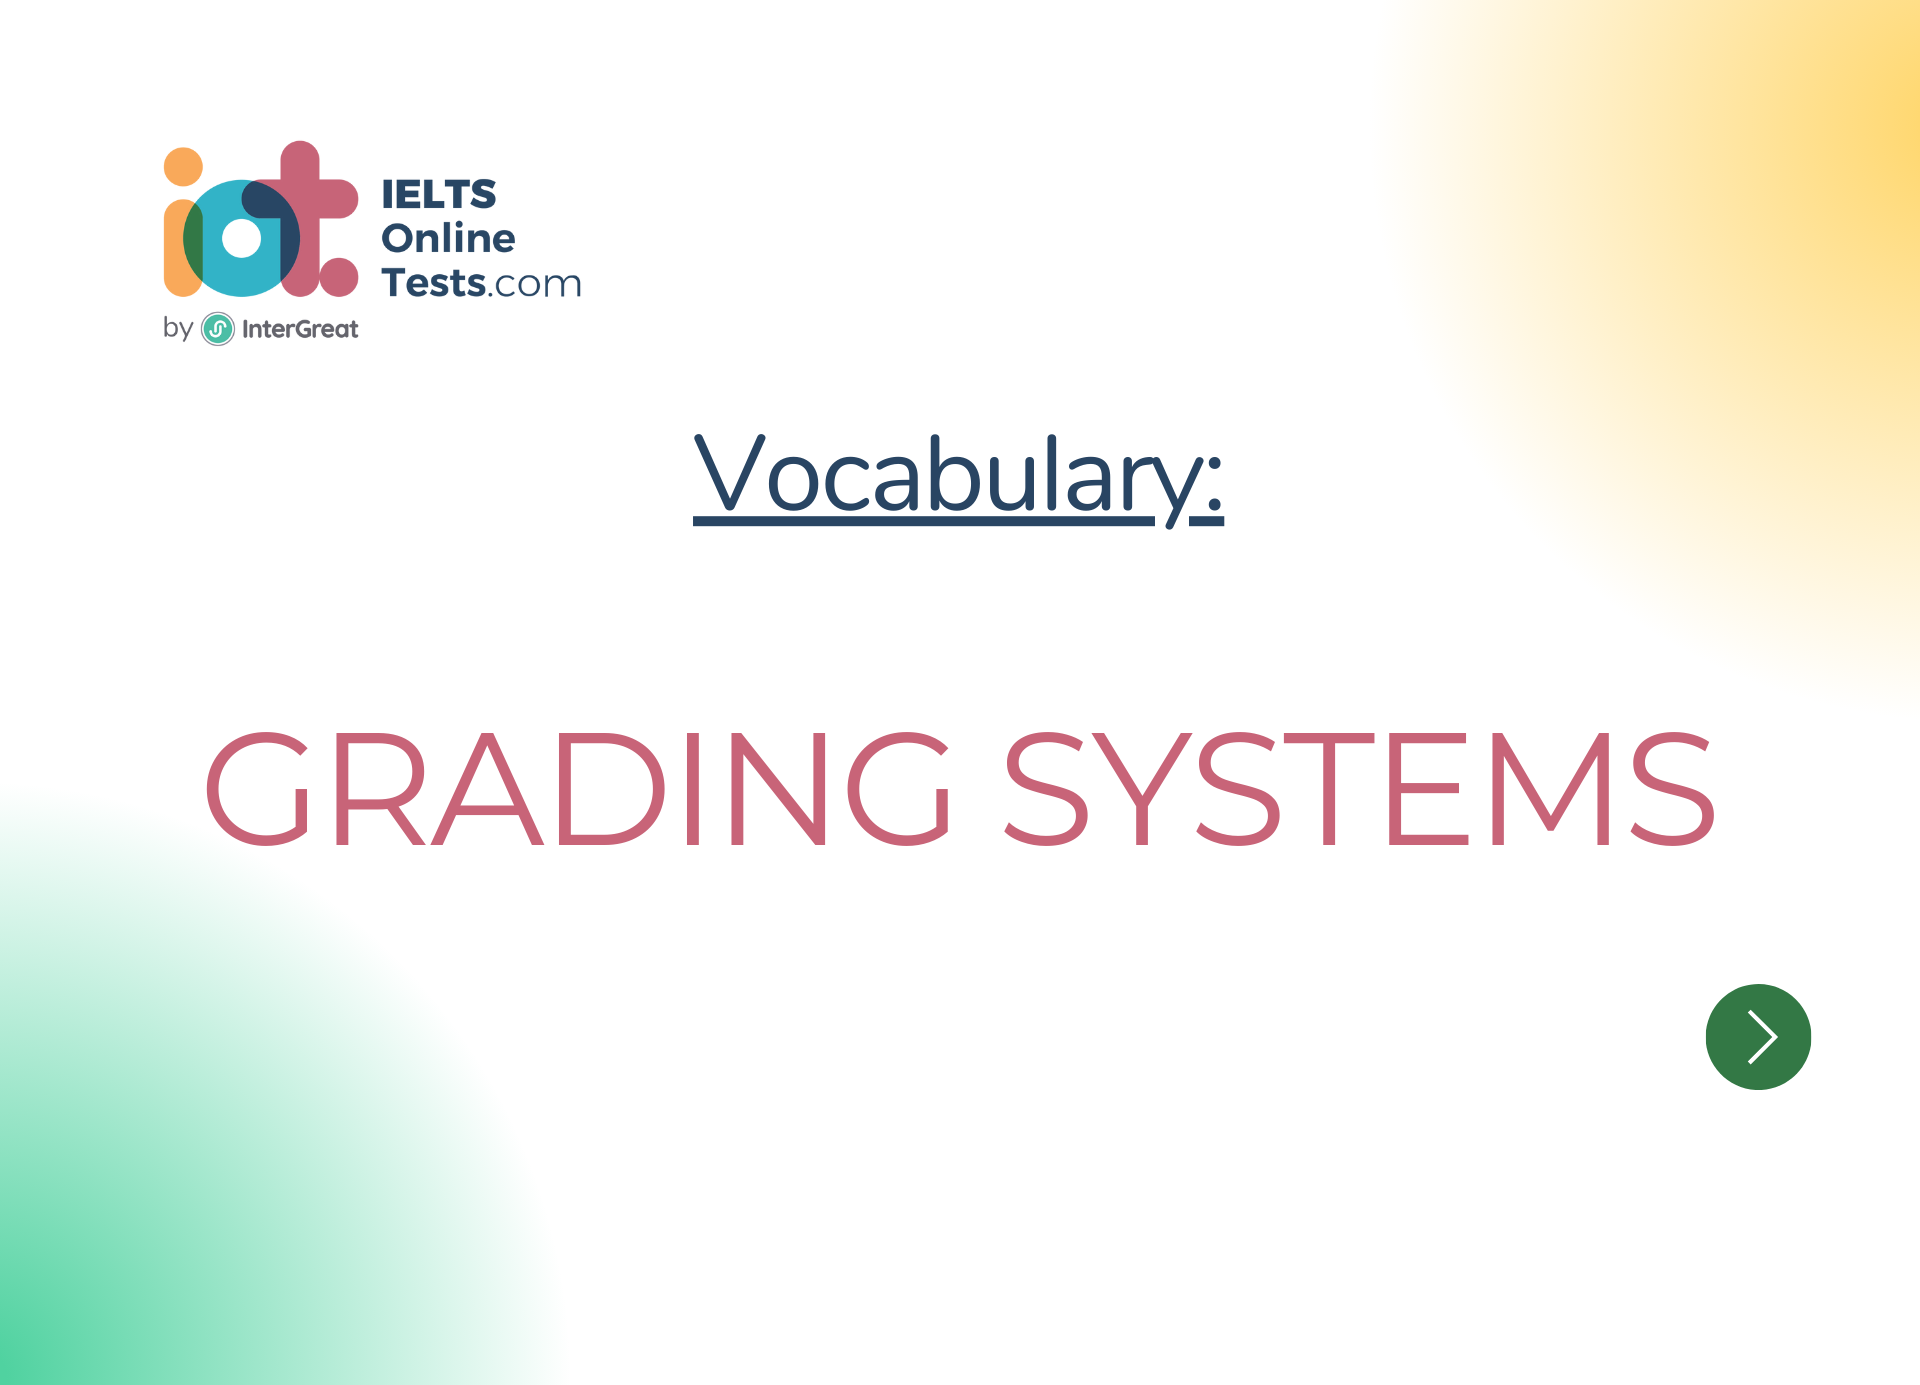 Grading systems